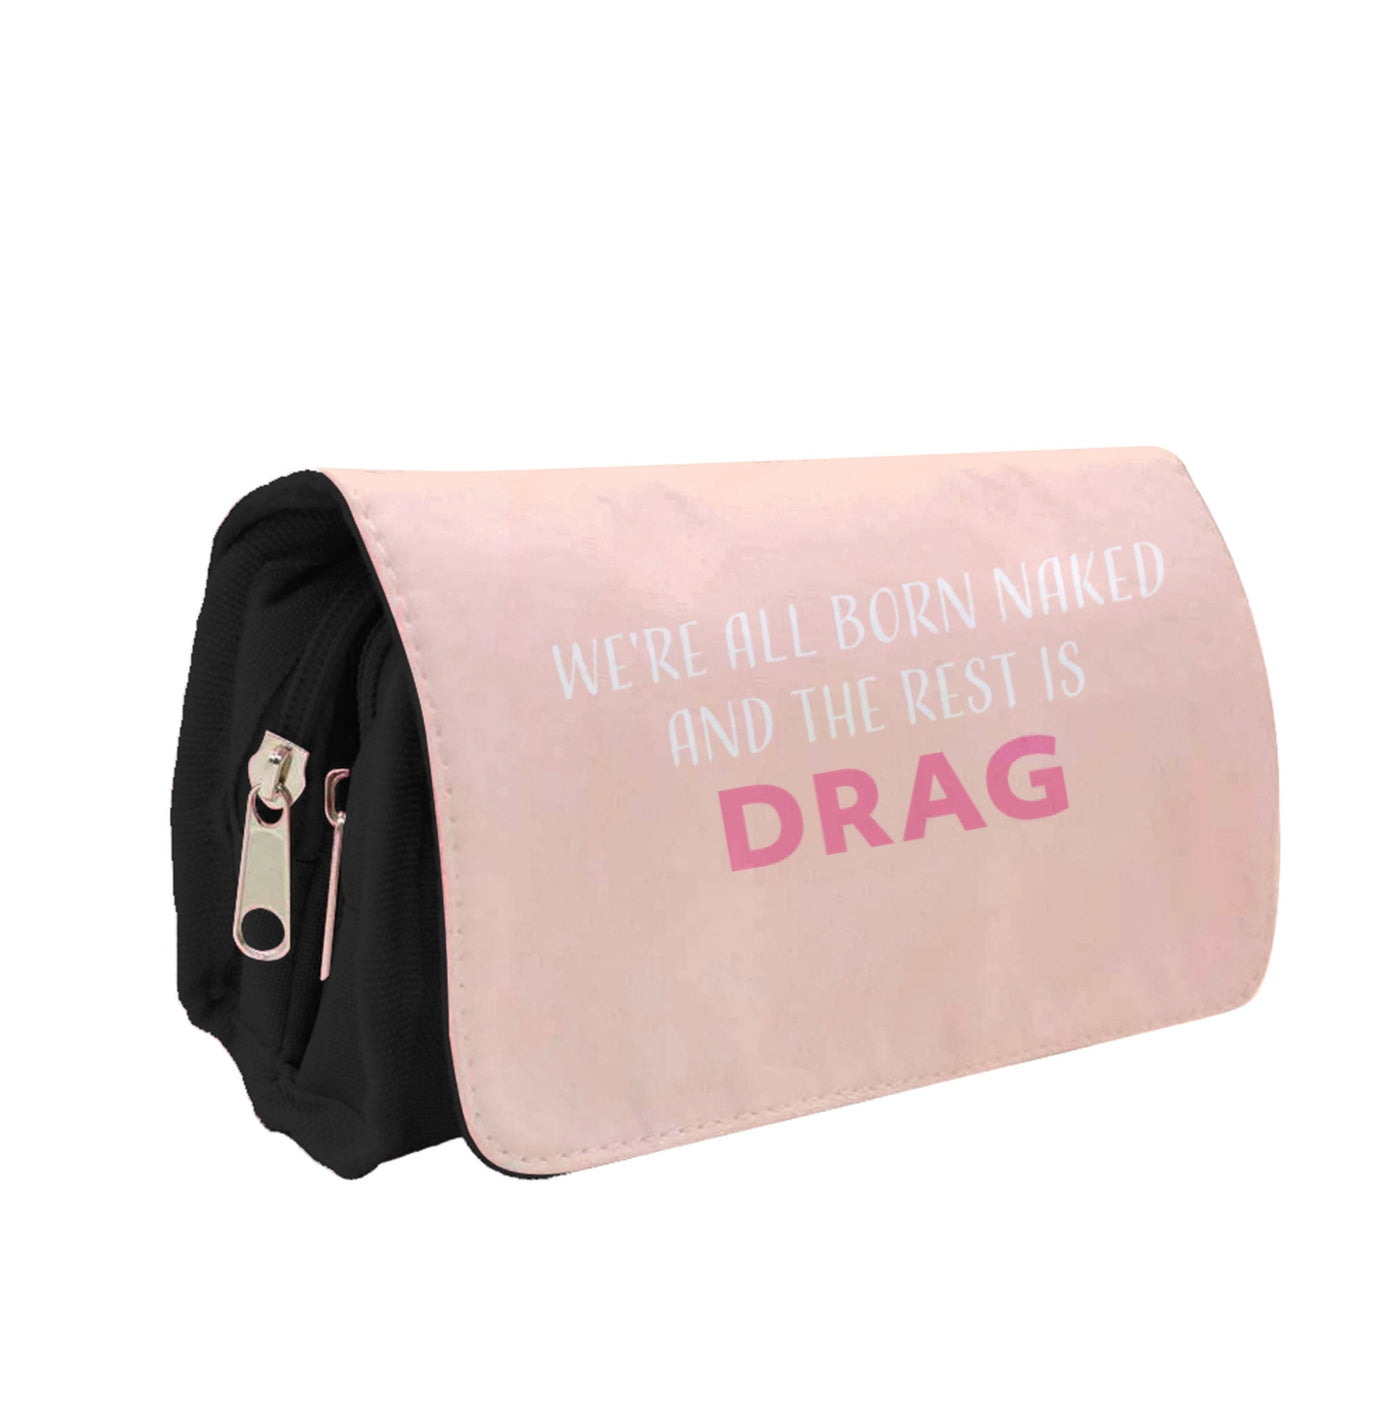 We're All Born Naked And The Rest Is Drag - RuPaul Pencil Case